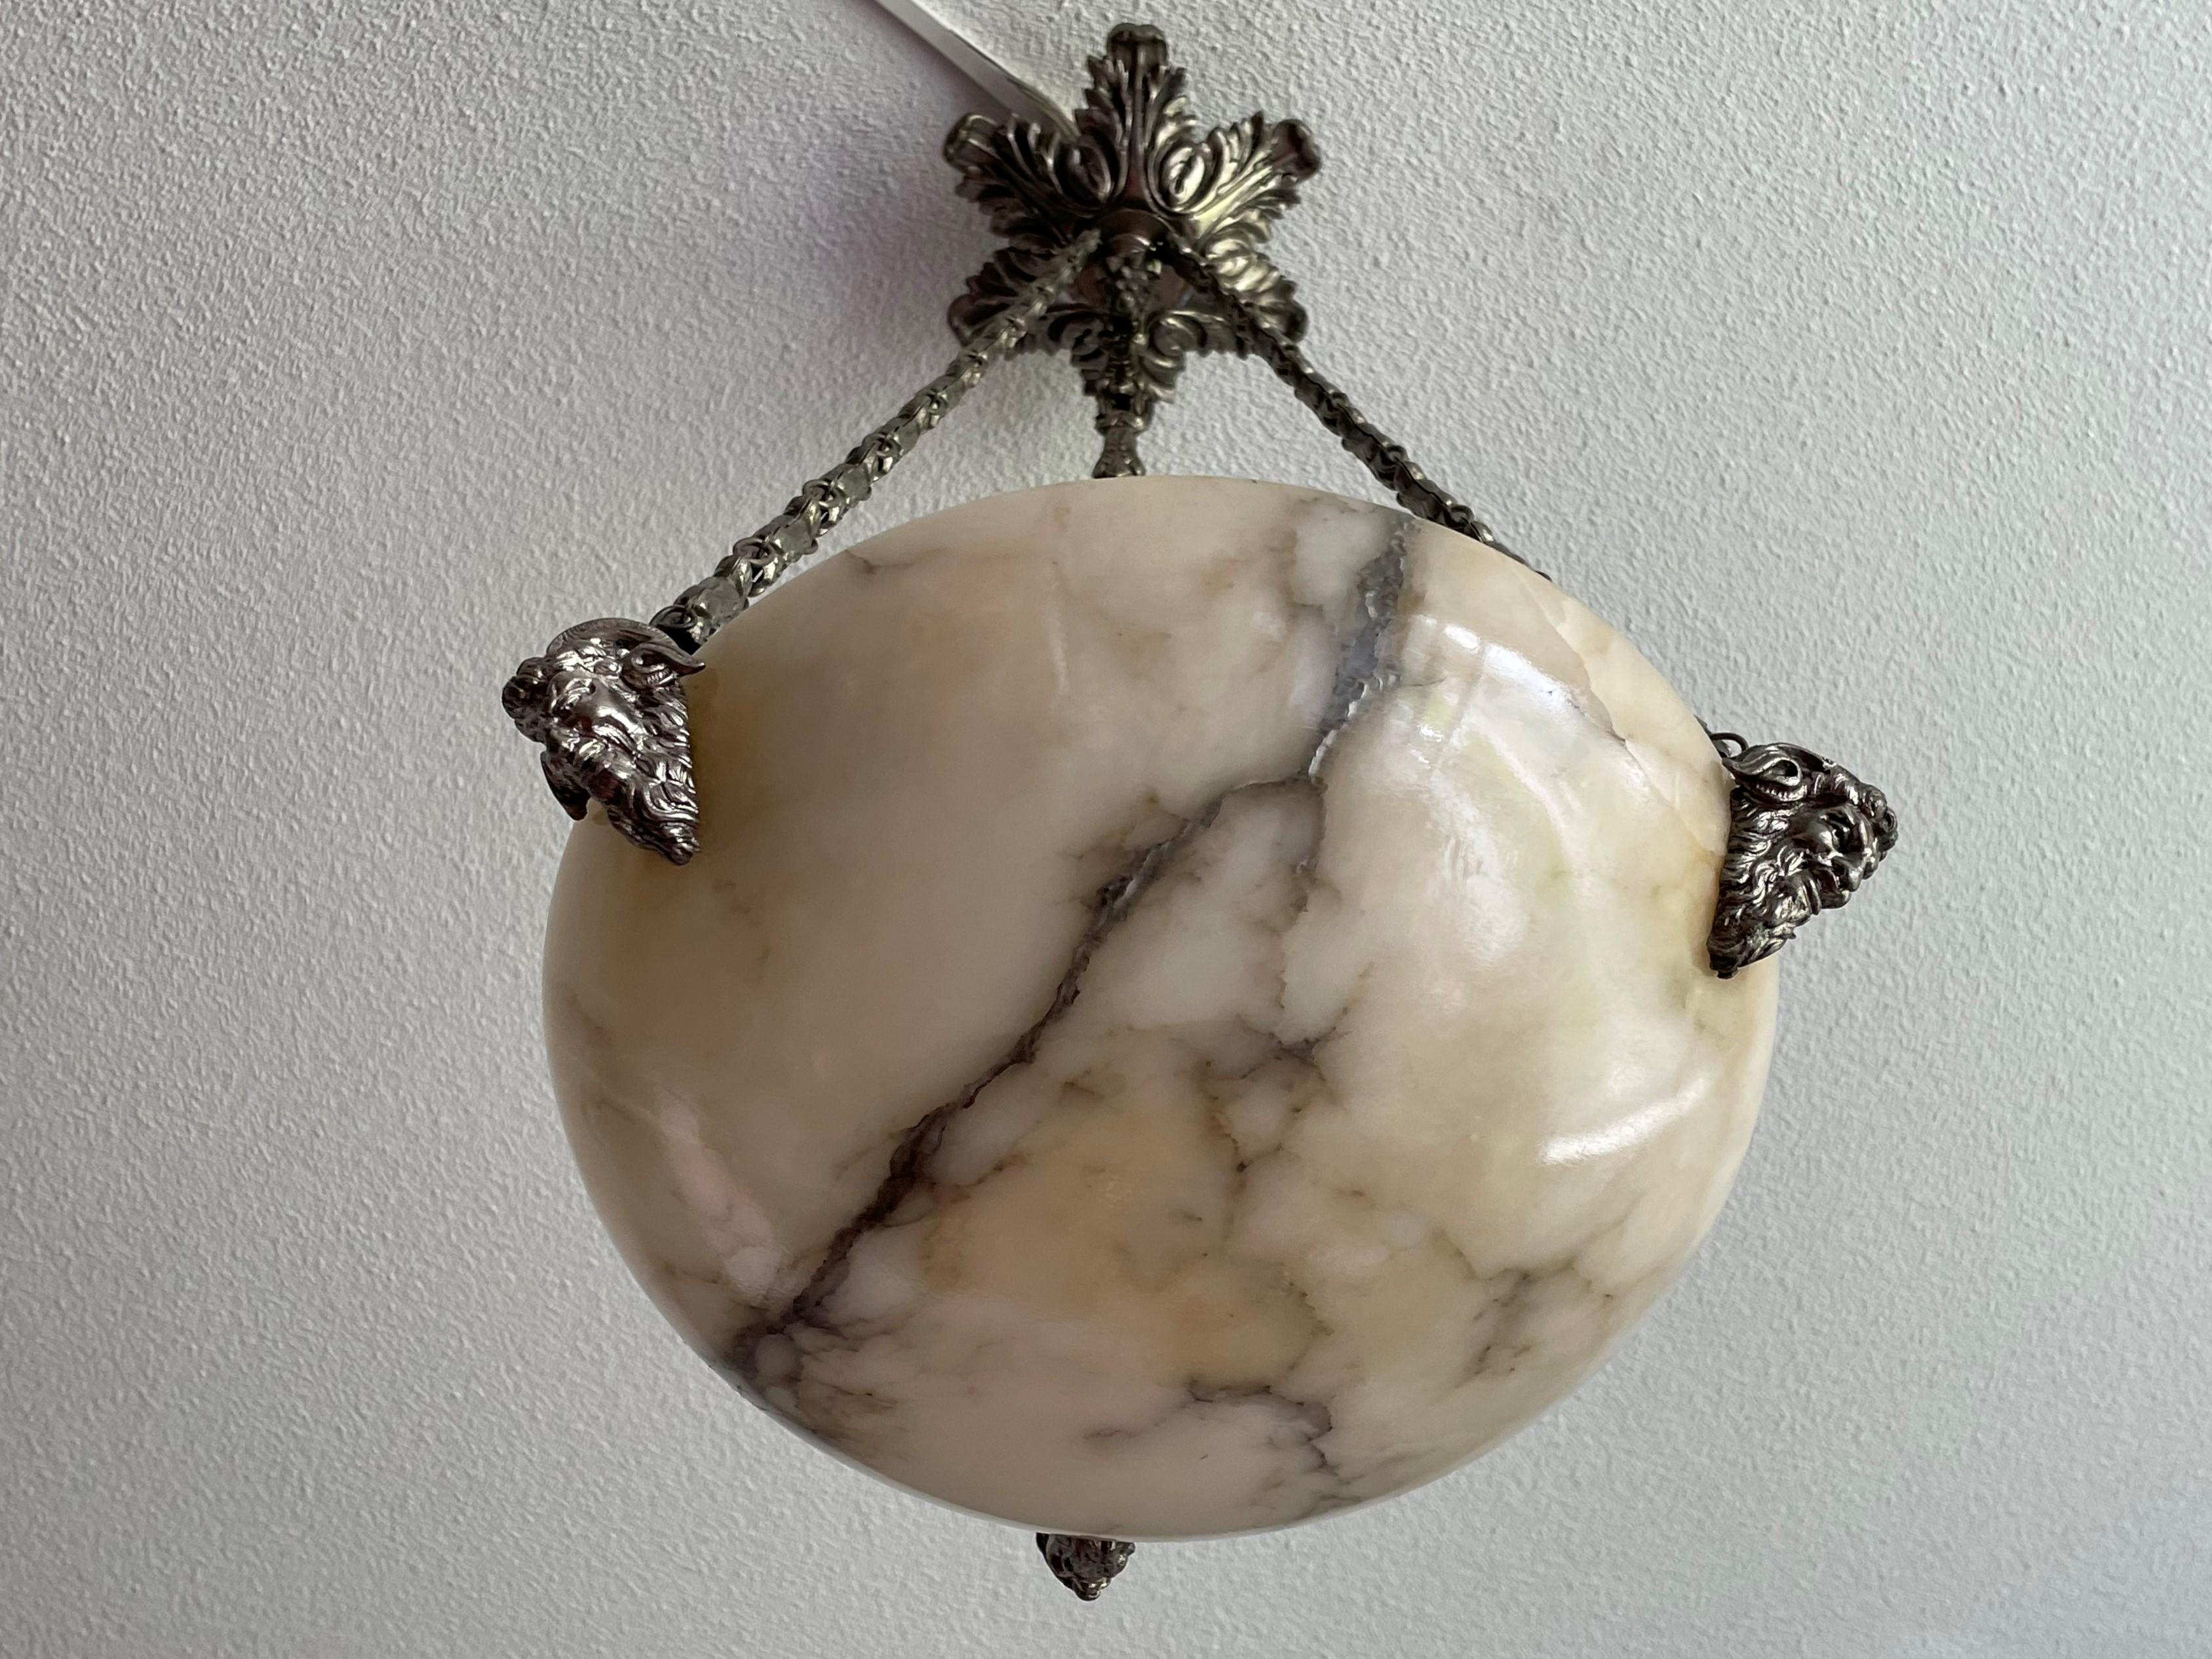 Brass Small & Coolest Ever Antique White & Black Alabaster Pendant w. Satyr Sculptures